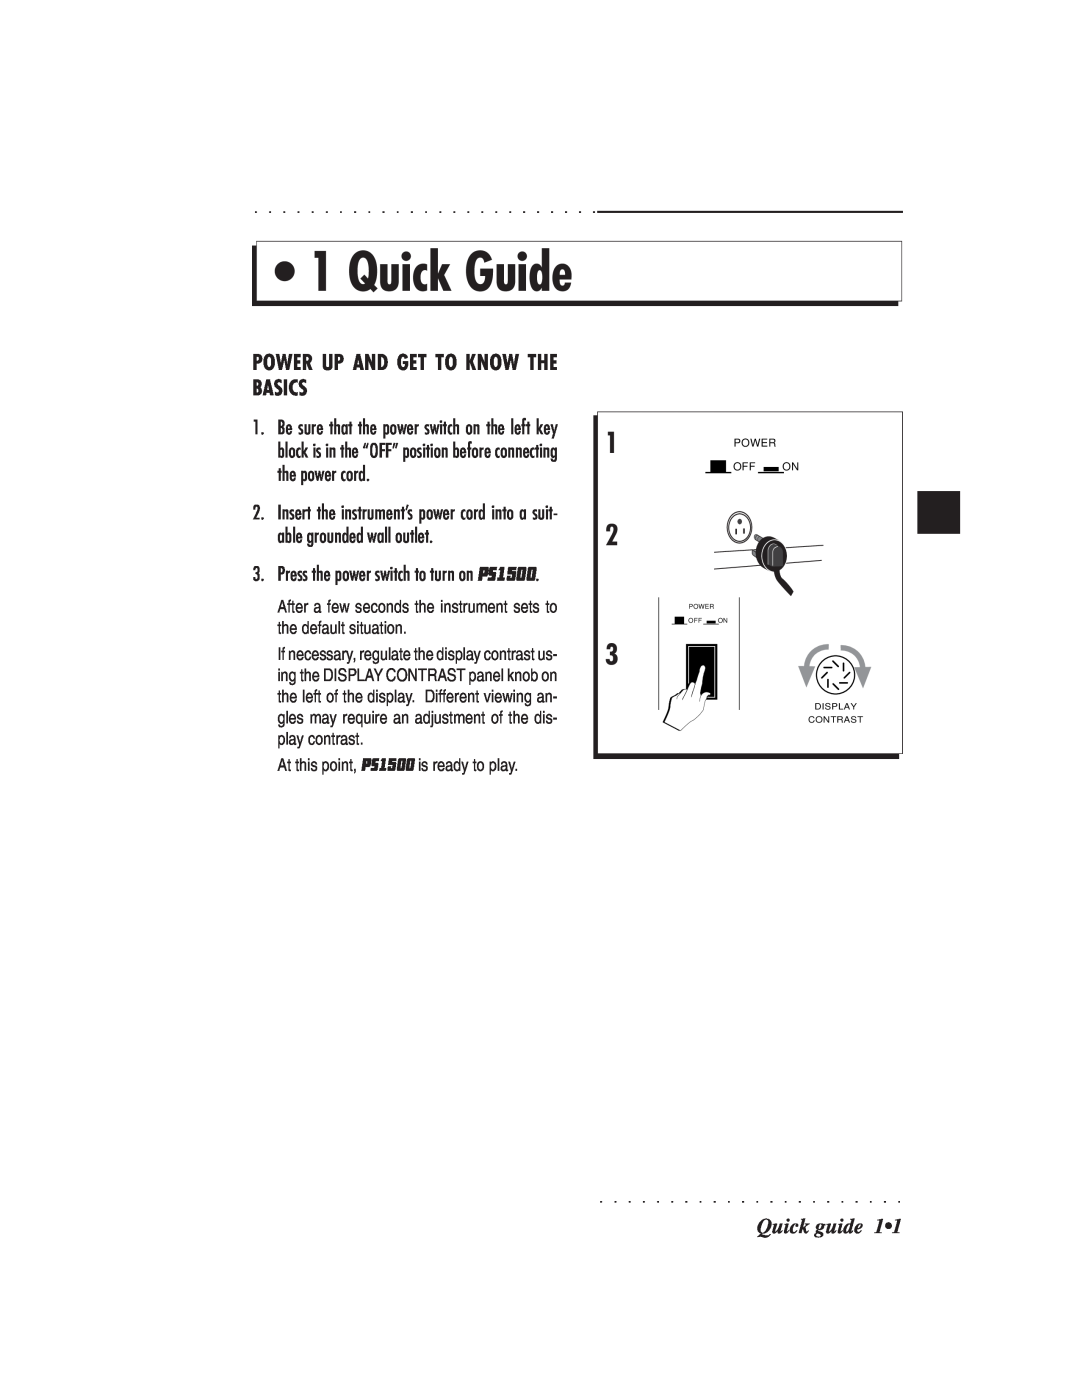 IBM PS1500 owner manual Quick Guide, Power Up And Get To Know The Basics, Quick guide 